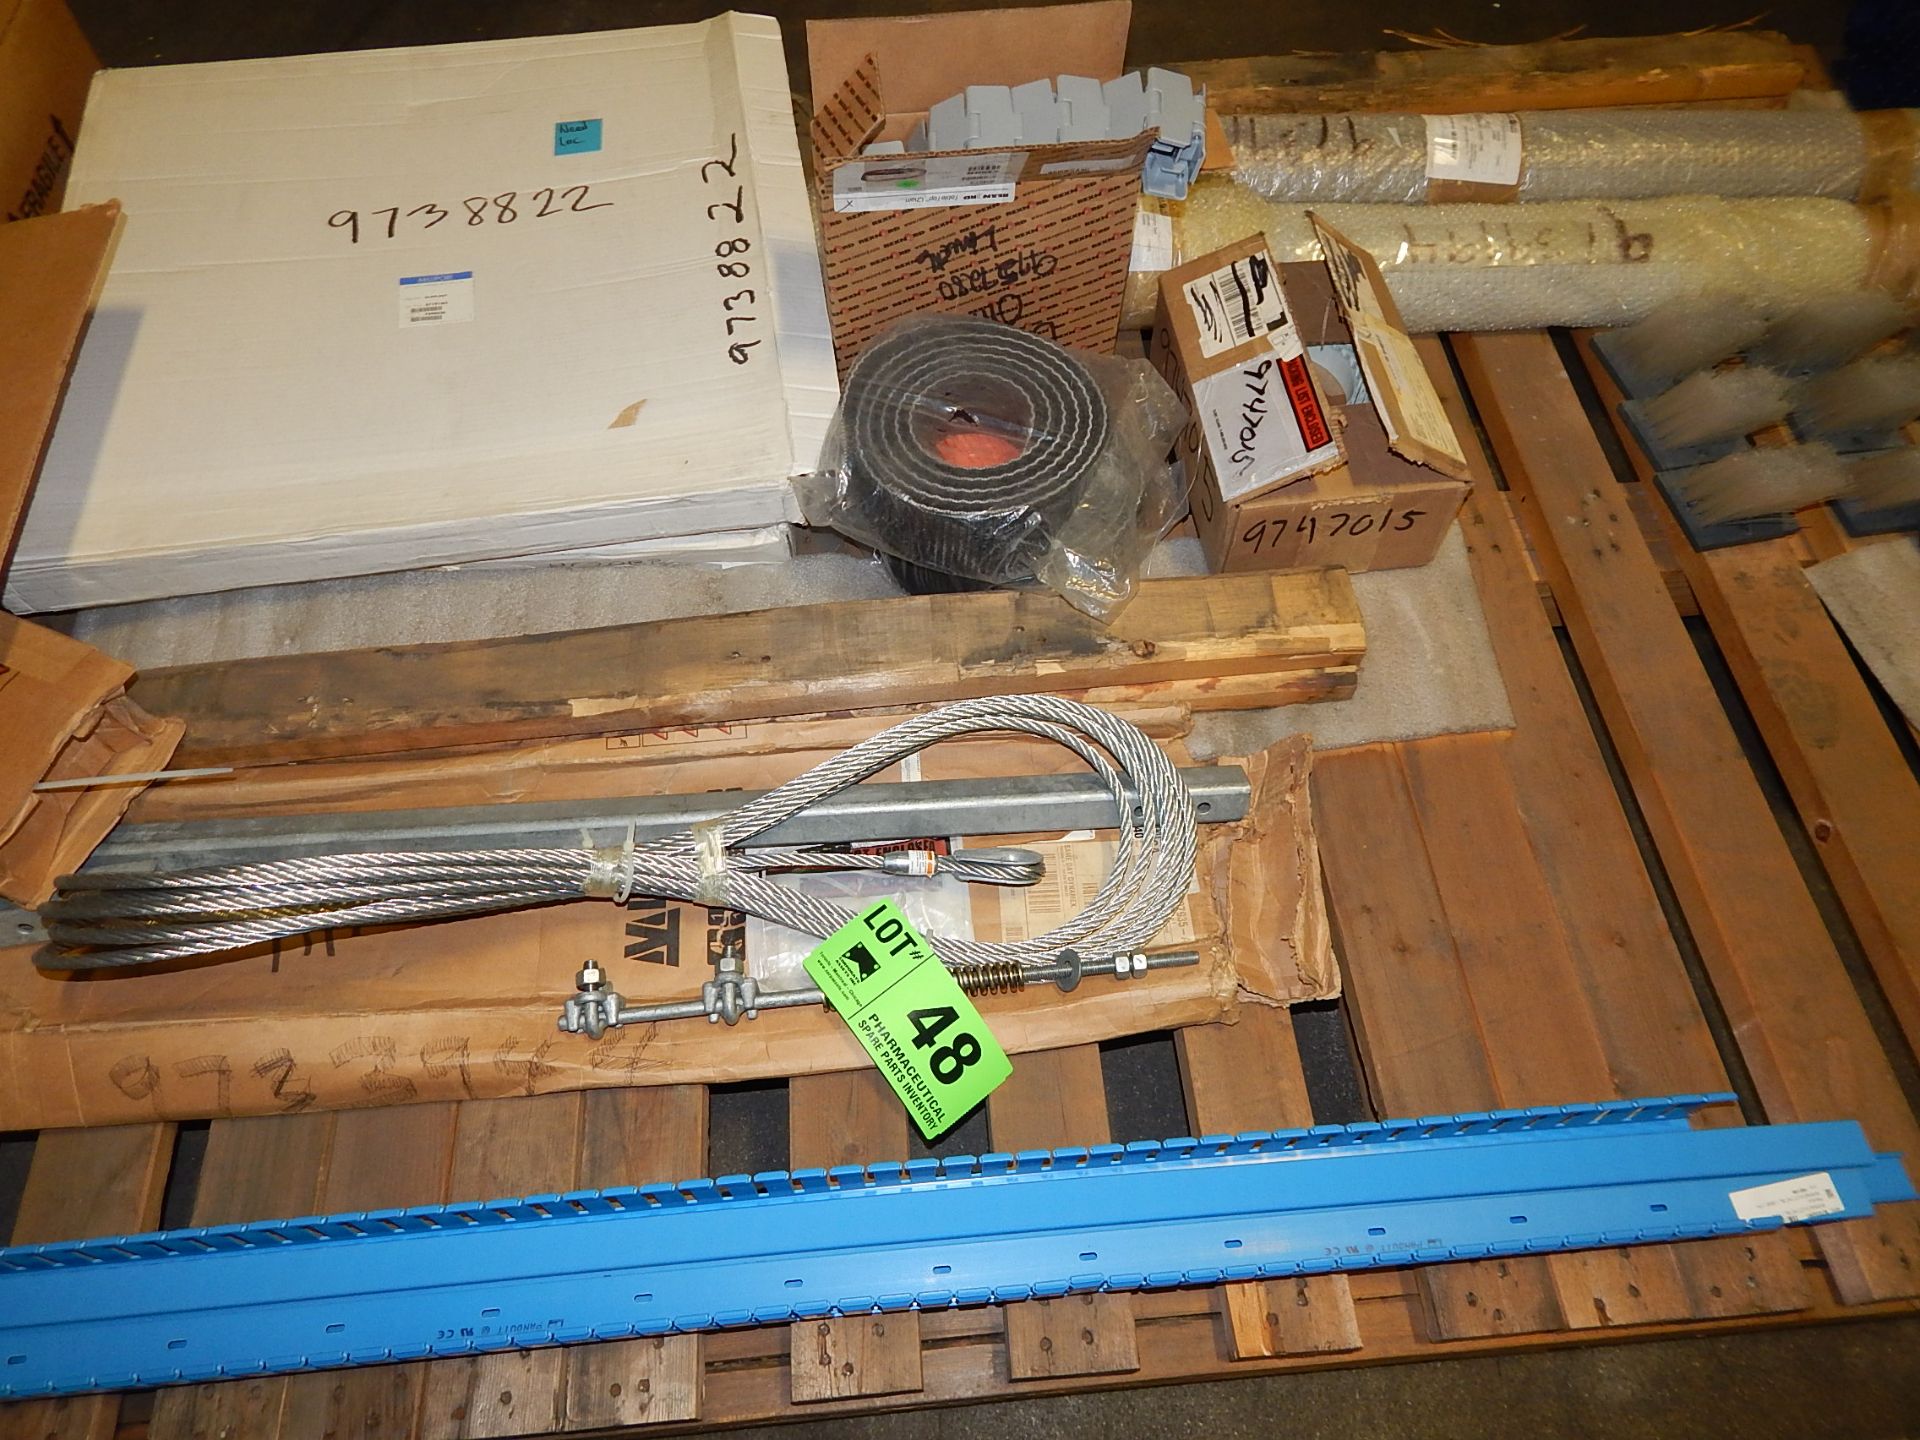 LOT/ SKID WITH COMPONENTS CONSISTING OF PLASTIC HARDWARE CASES, CABLE,MISC PARTS AND BRUSHES - Image 2 of 3